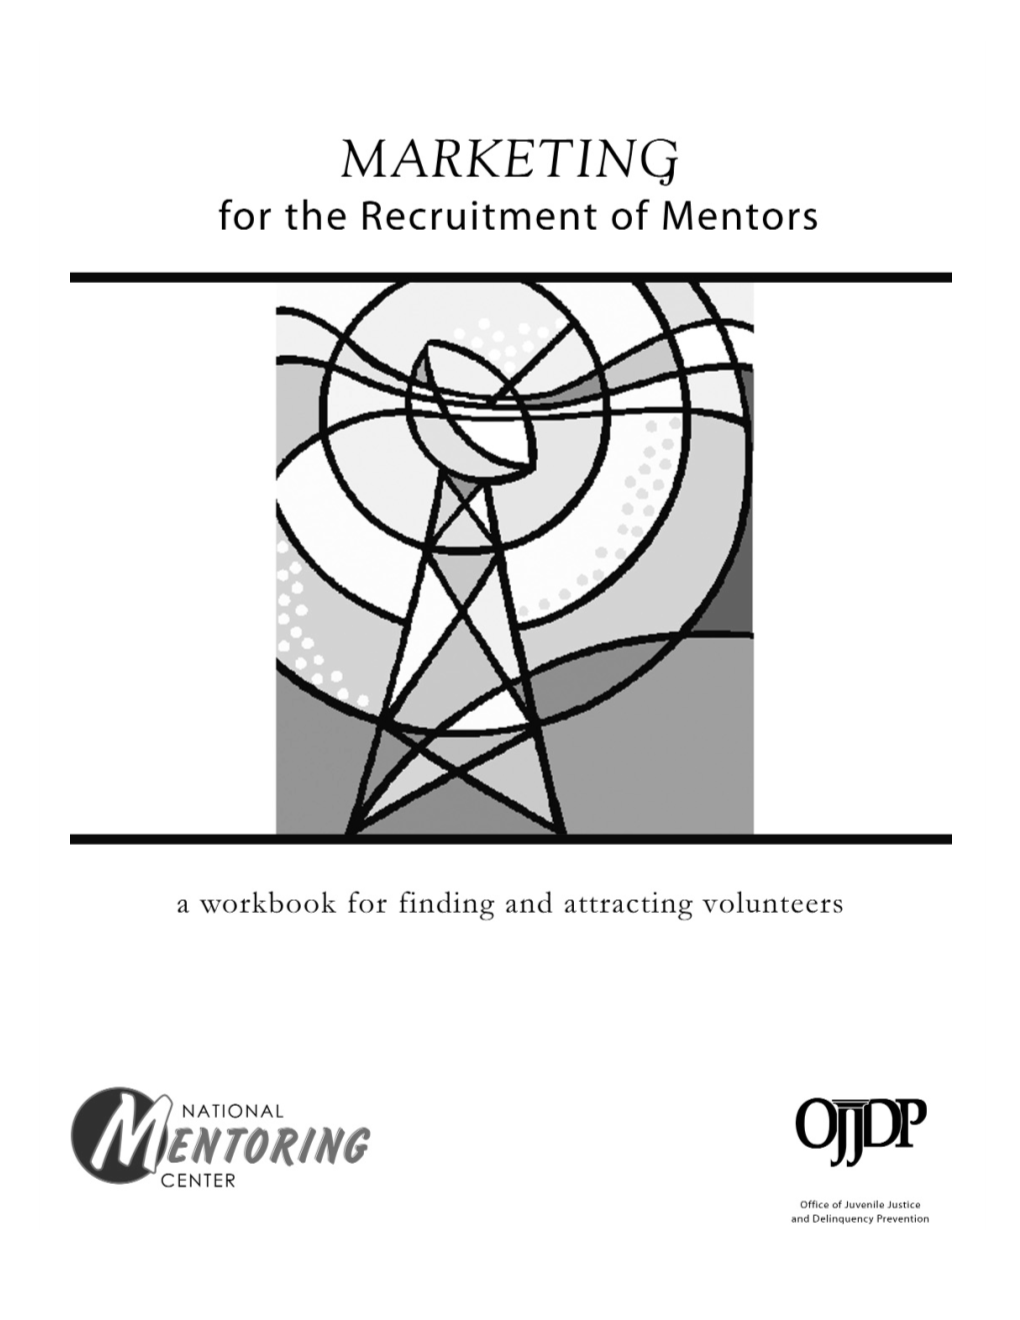 Marketing for the Recruitment of Mentors